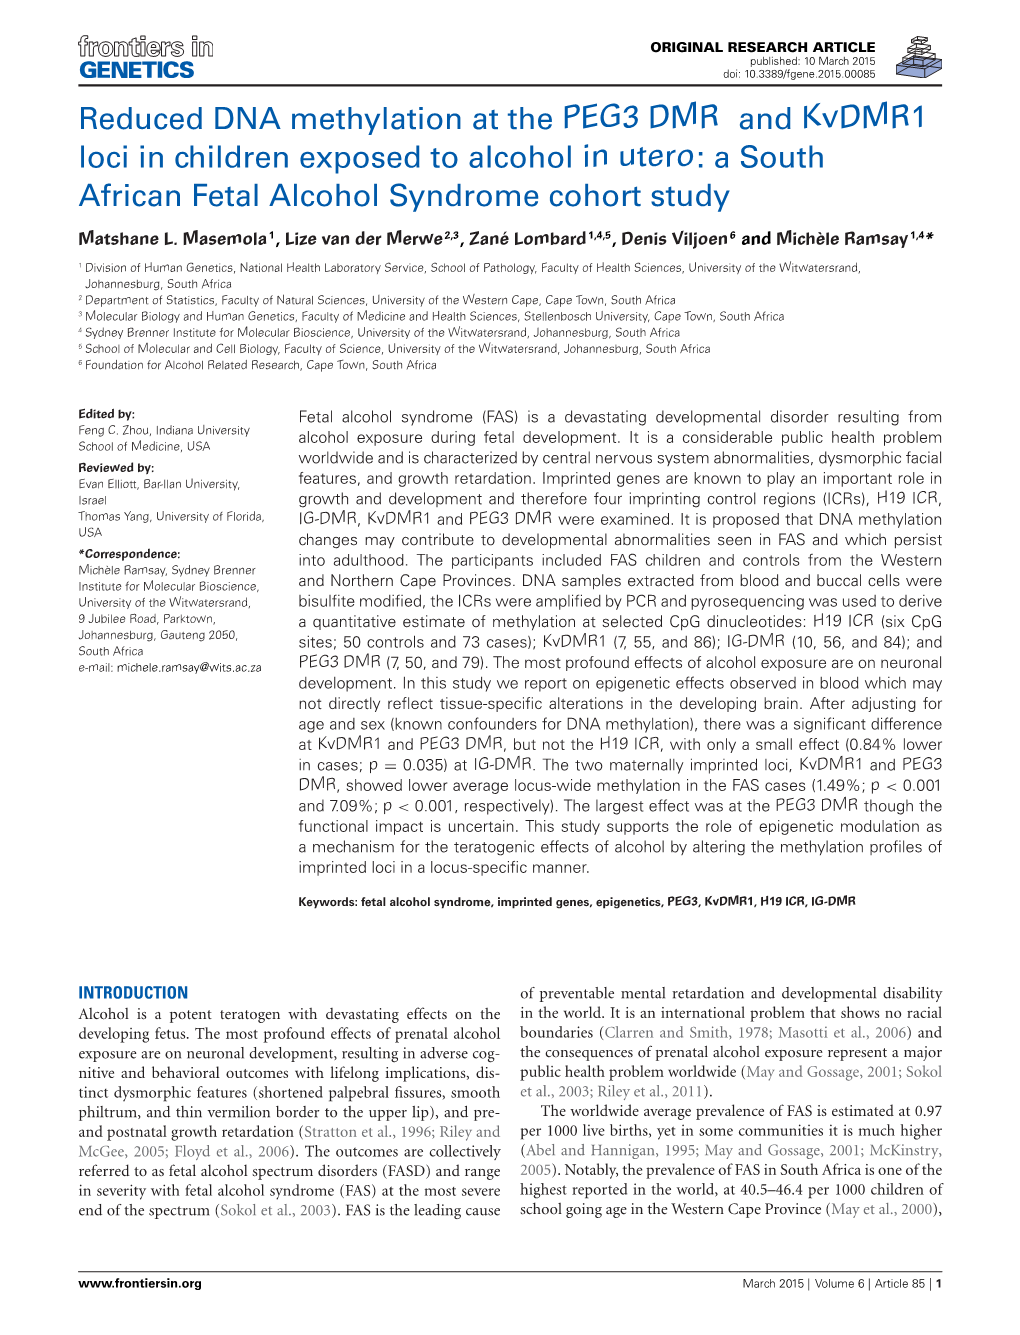 Reduced DNA Methylation at the PEG3 DMR and Kvdmr1 Loci in Children Exposed to Alcohol in Utero: a South African Fetal Alcohol Syndrome Cohort Study